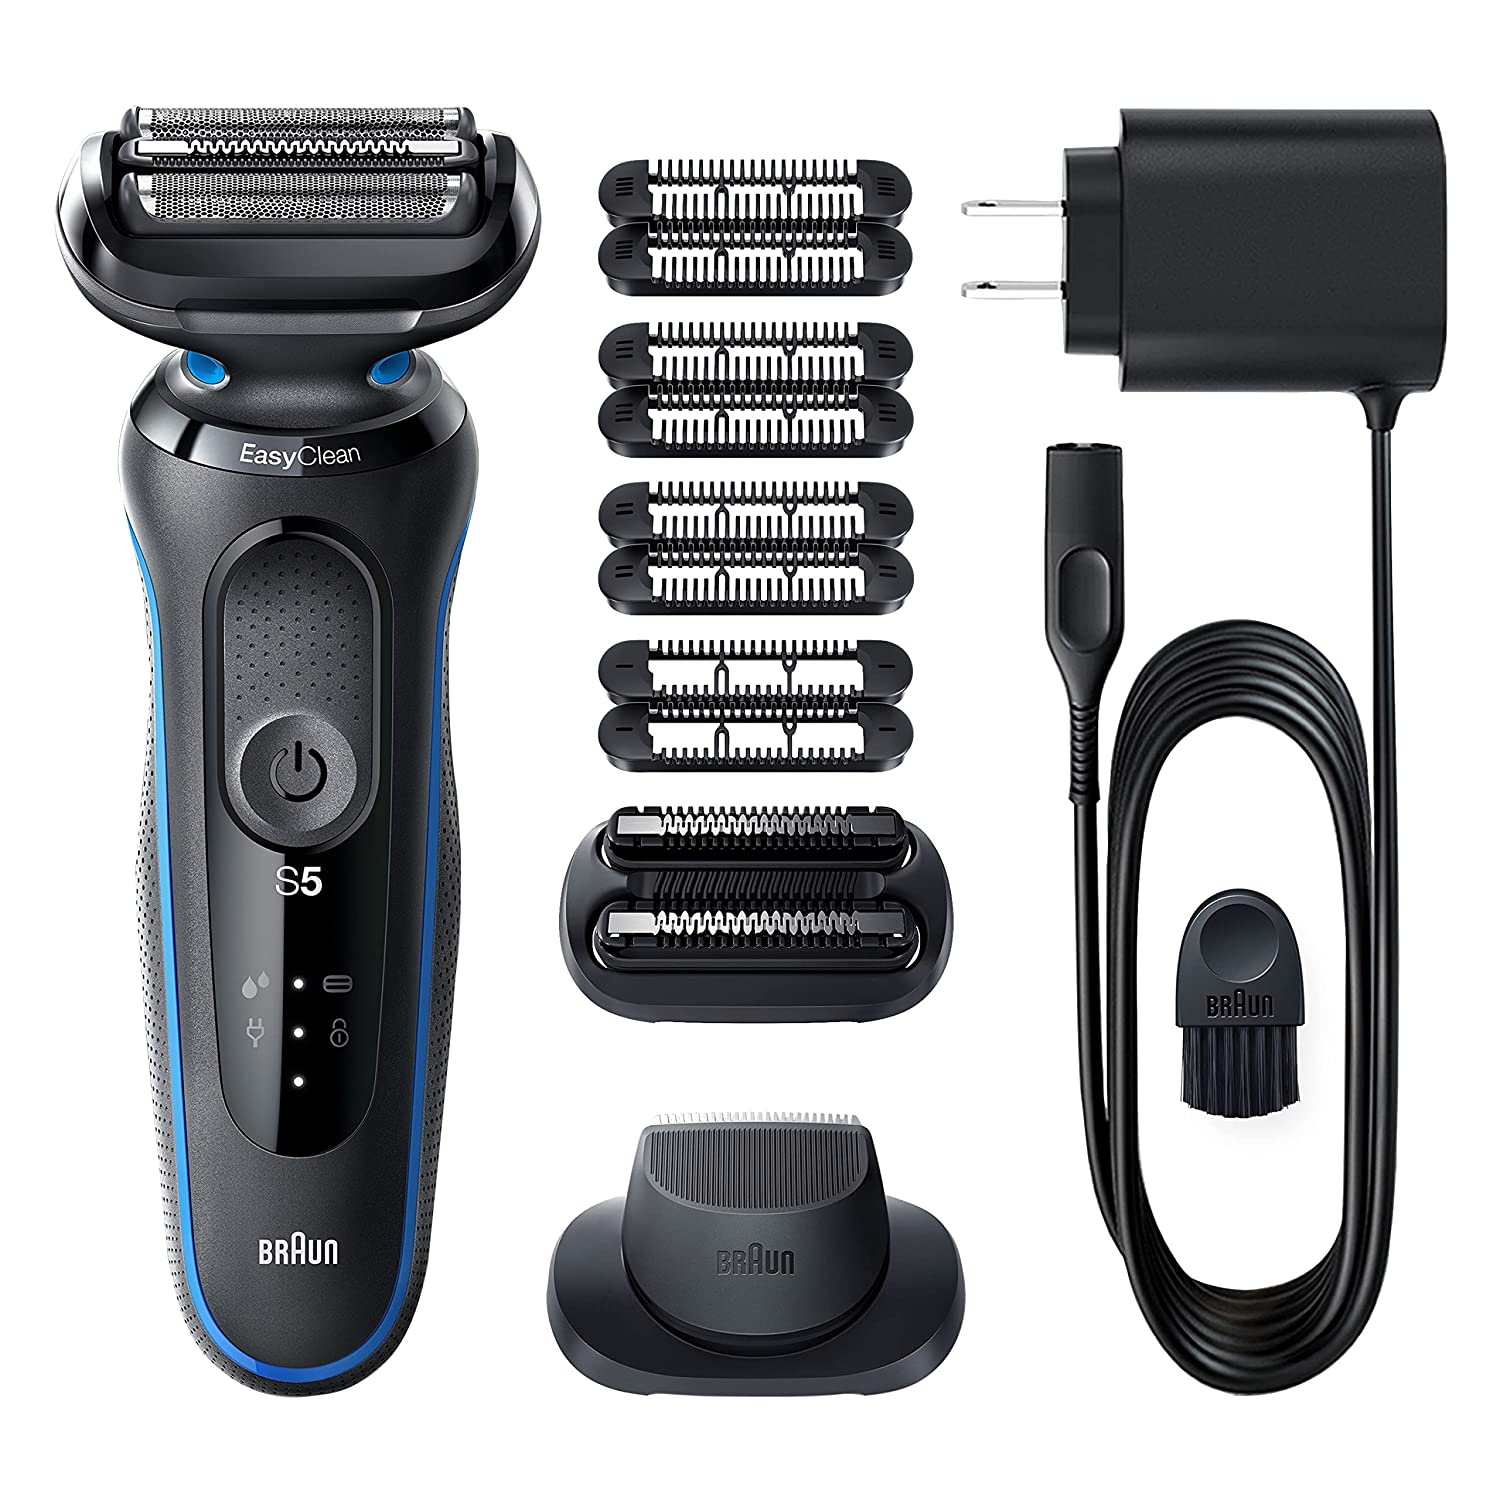 Braun Series 5 5035s Electric Shaver with Precision Trimmer, Stubble Beard Trimmer, Wet & Dry, Rechargeable, Cordless Foil Shaver, Blue $50